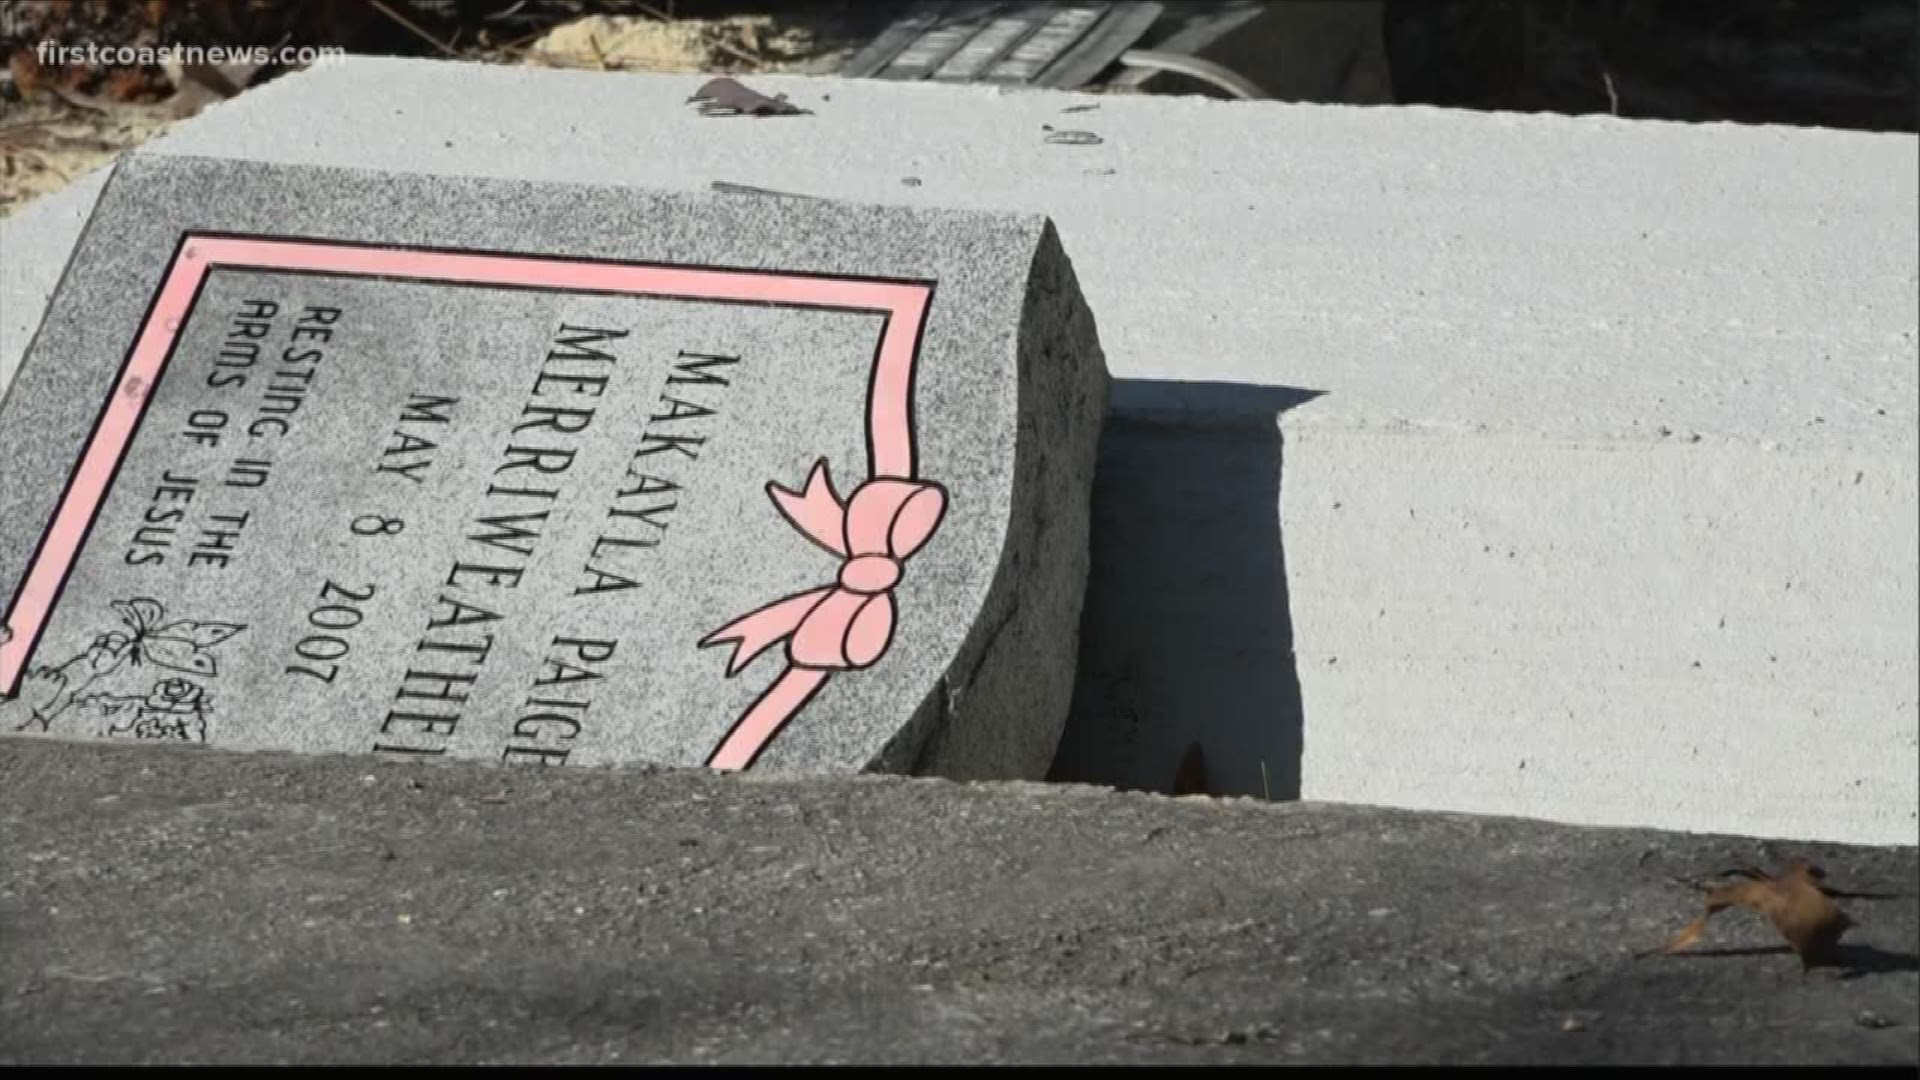 A cemetery in Middleburg was vandalized, leaving behind smashed gravestones and the remains of a child dragged out of her grave.